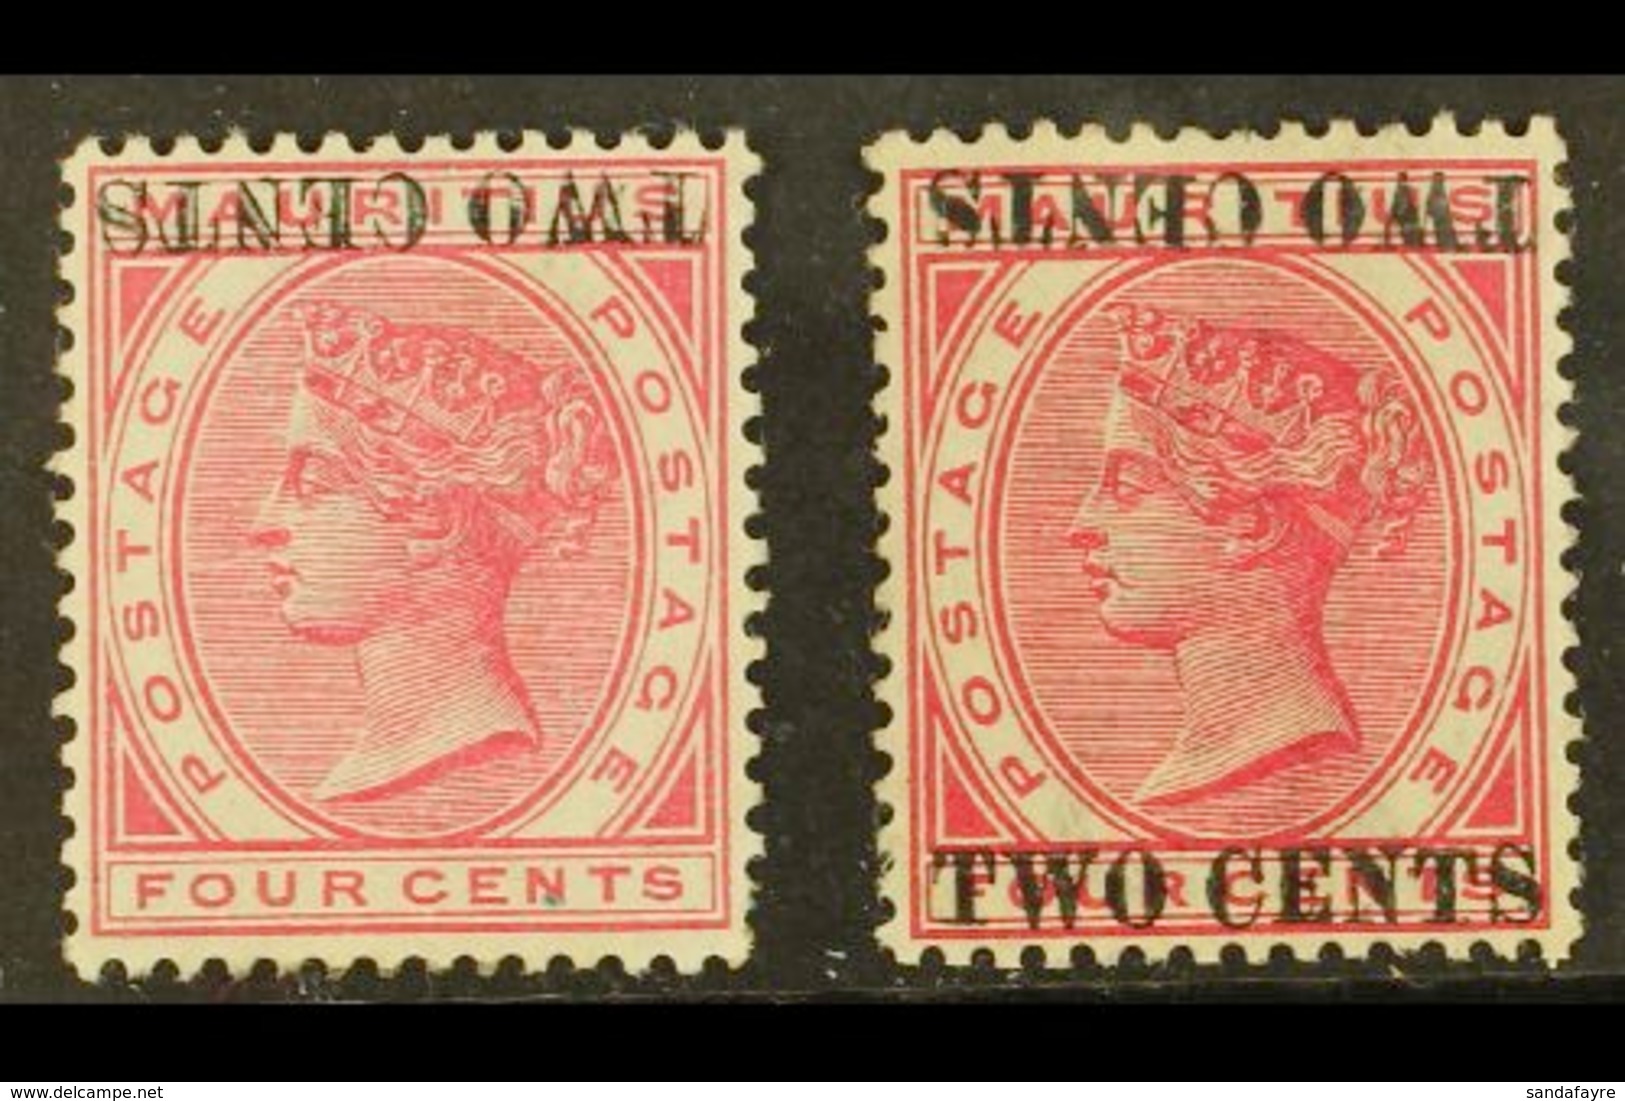 1891  2c On 4c Carmine SURCHARGE INVERTED Variety (one Short Perf), SG 118a, And 2c On 4c Carmine SURCHARGE DOUBLE, ONE  - Mauritius (...-1967)